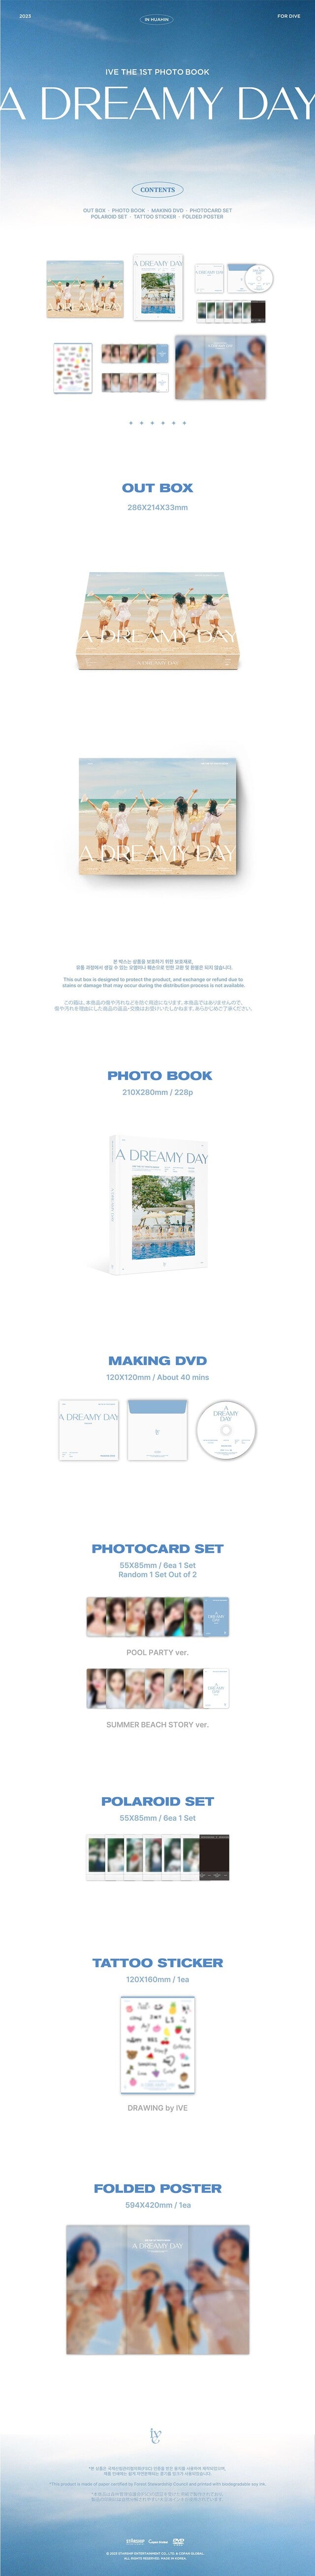 [PREORDER] IVE - THE 1ST PHOTOBOOK [A DREAMY DAY]